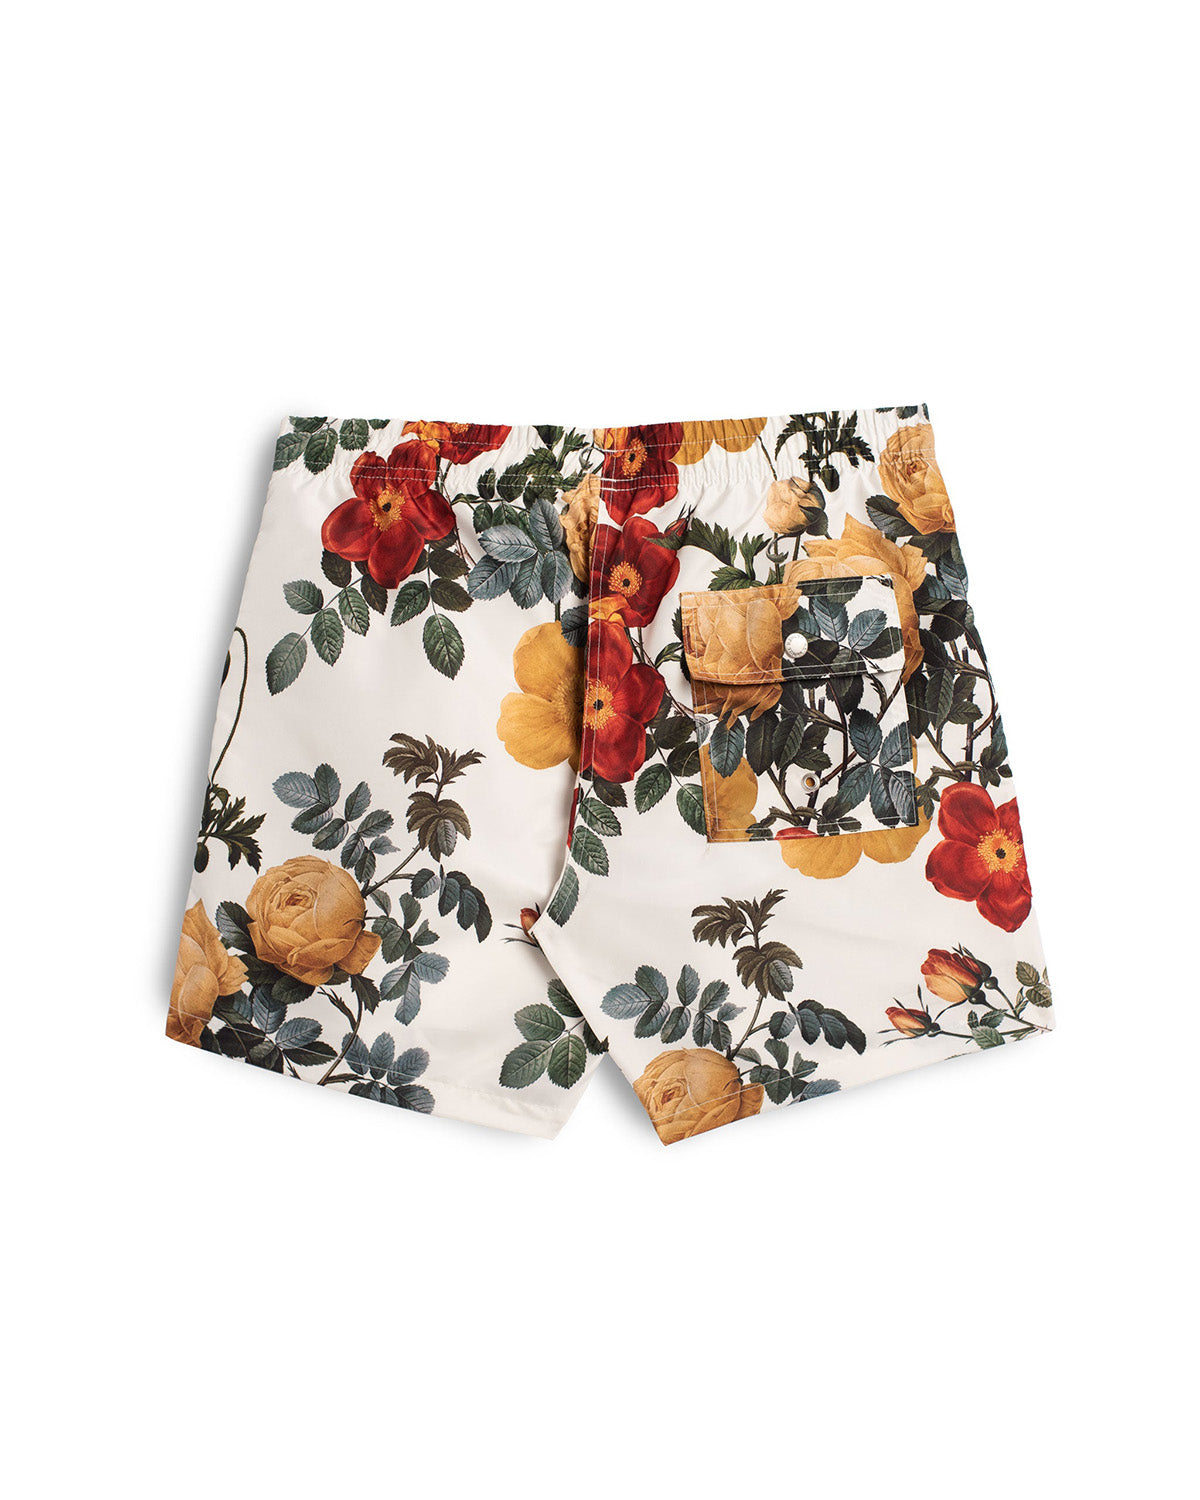 back view of white Bather swim trunk with red and yellow floral pattern 